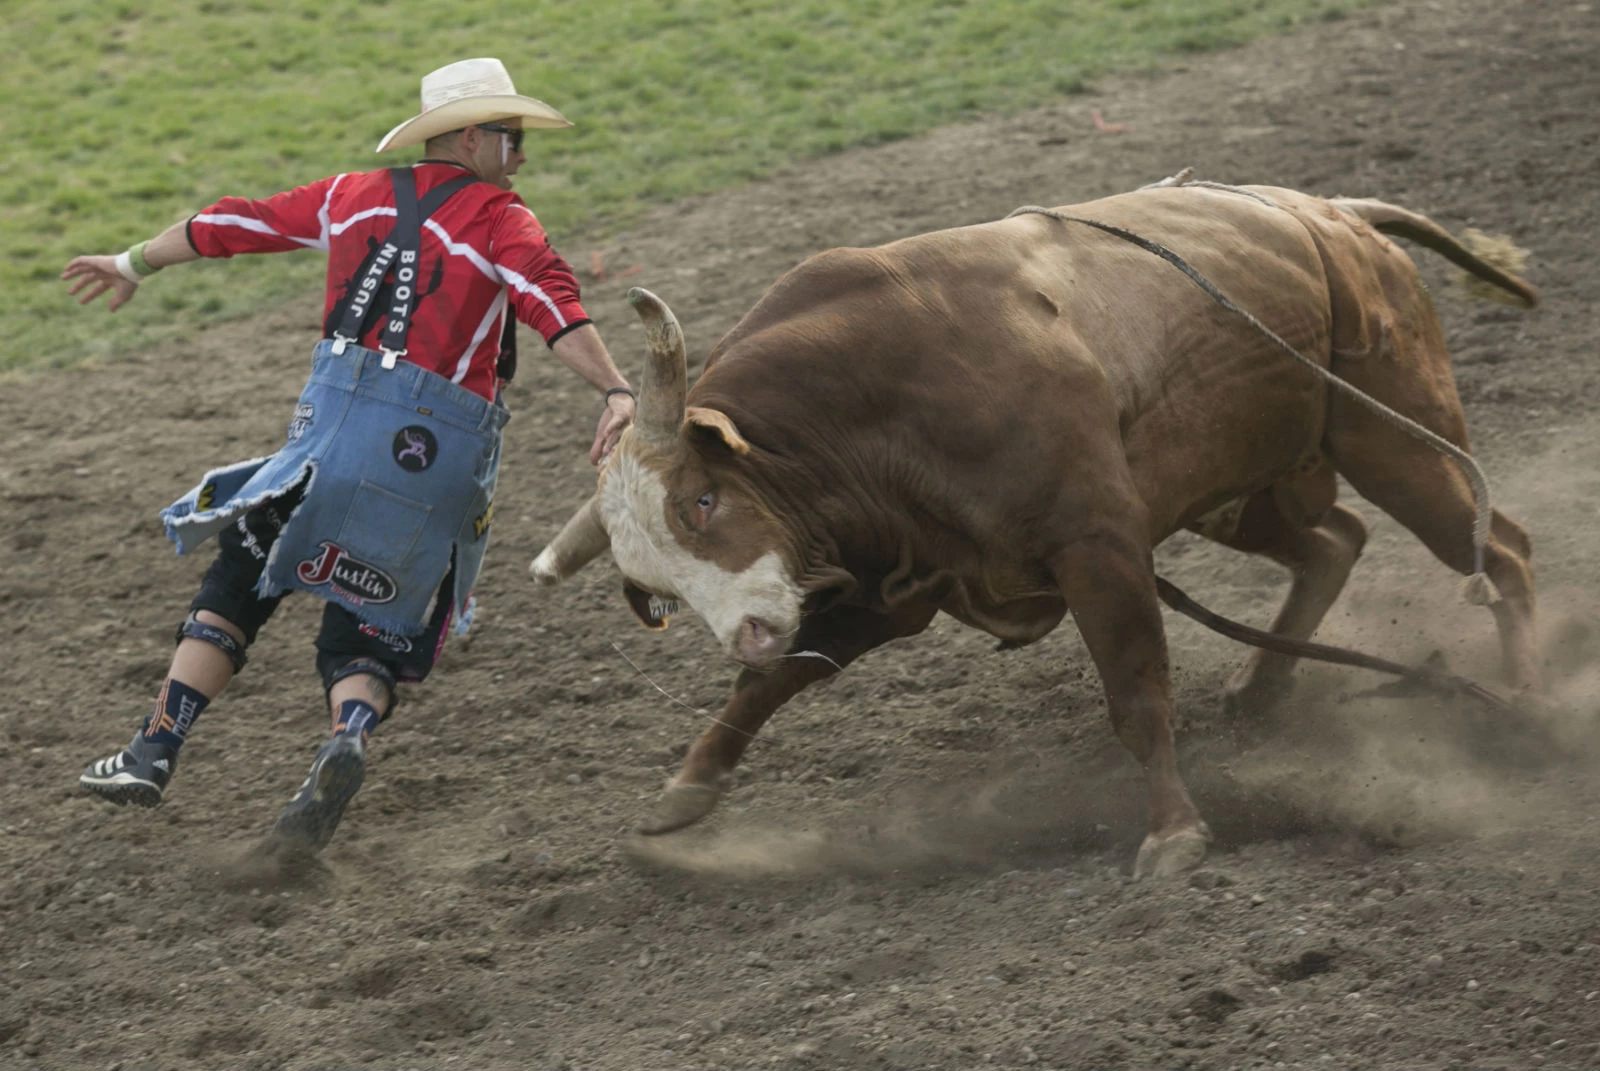 The Difference Between A Bull Fighter And Rodeo Clown